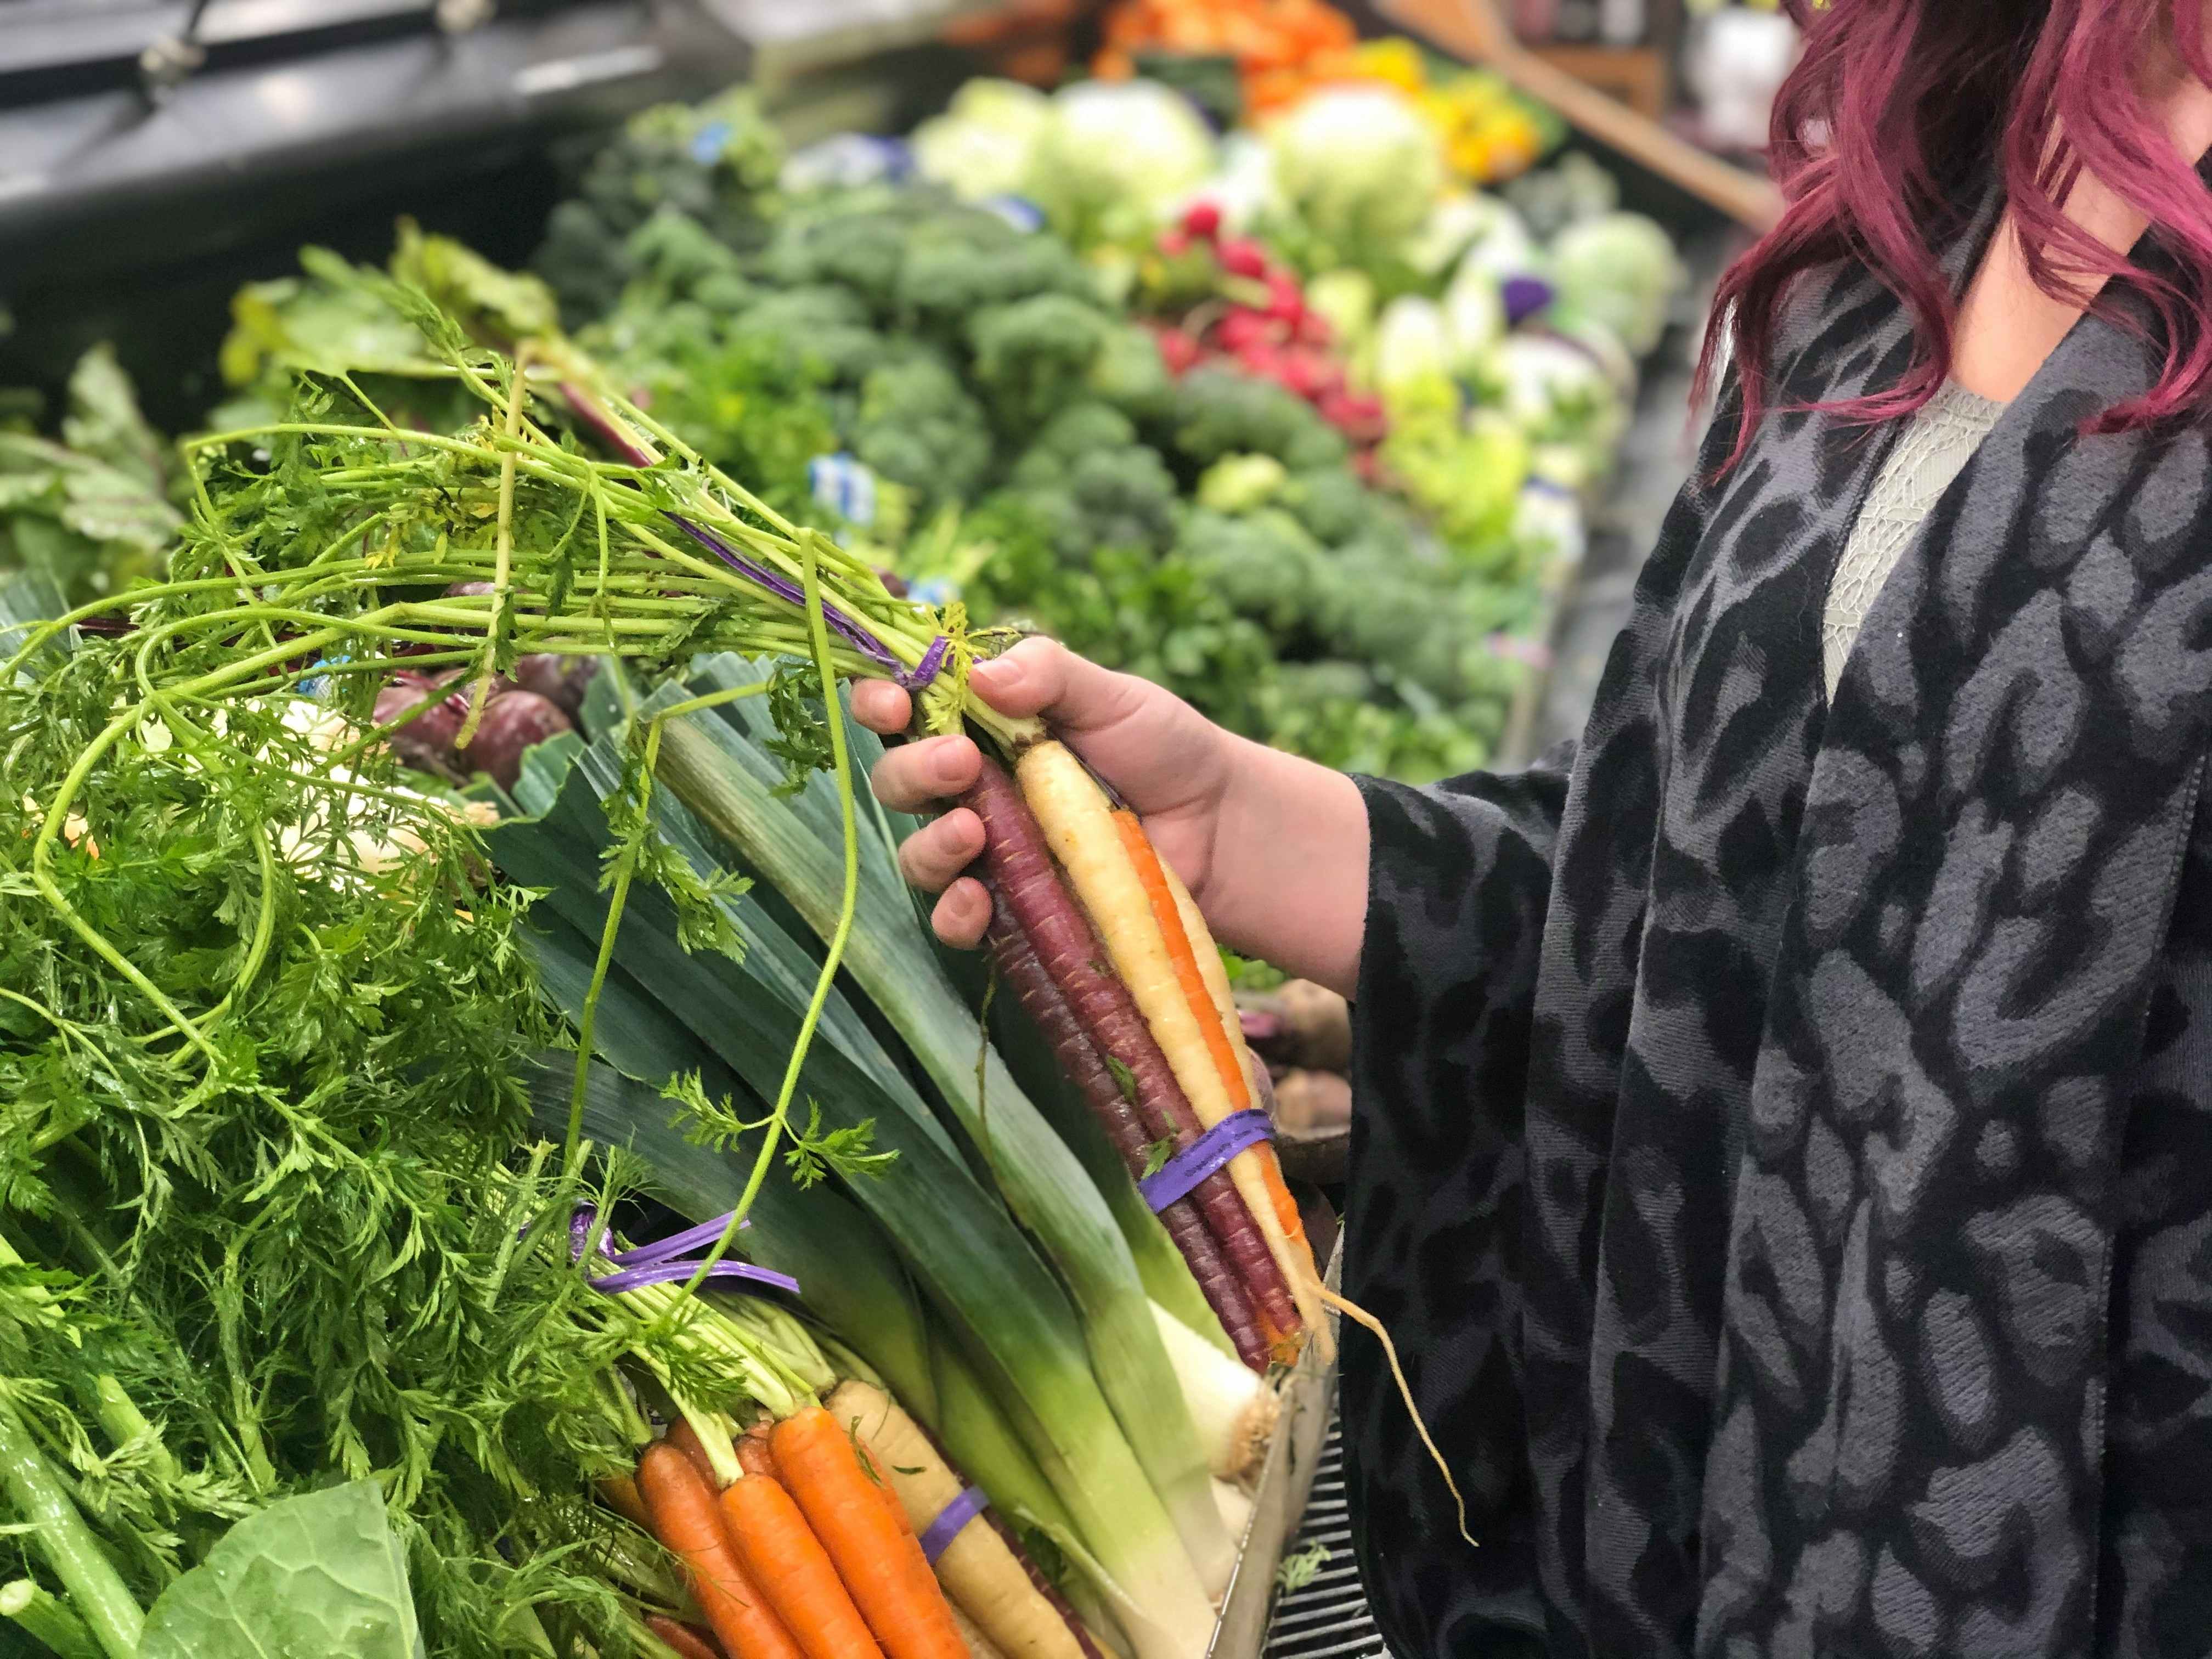 A woman shopping in the produce section.